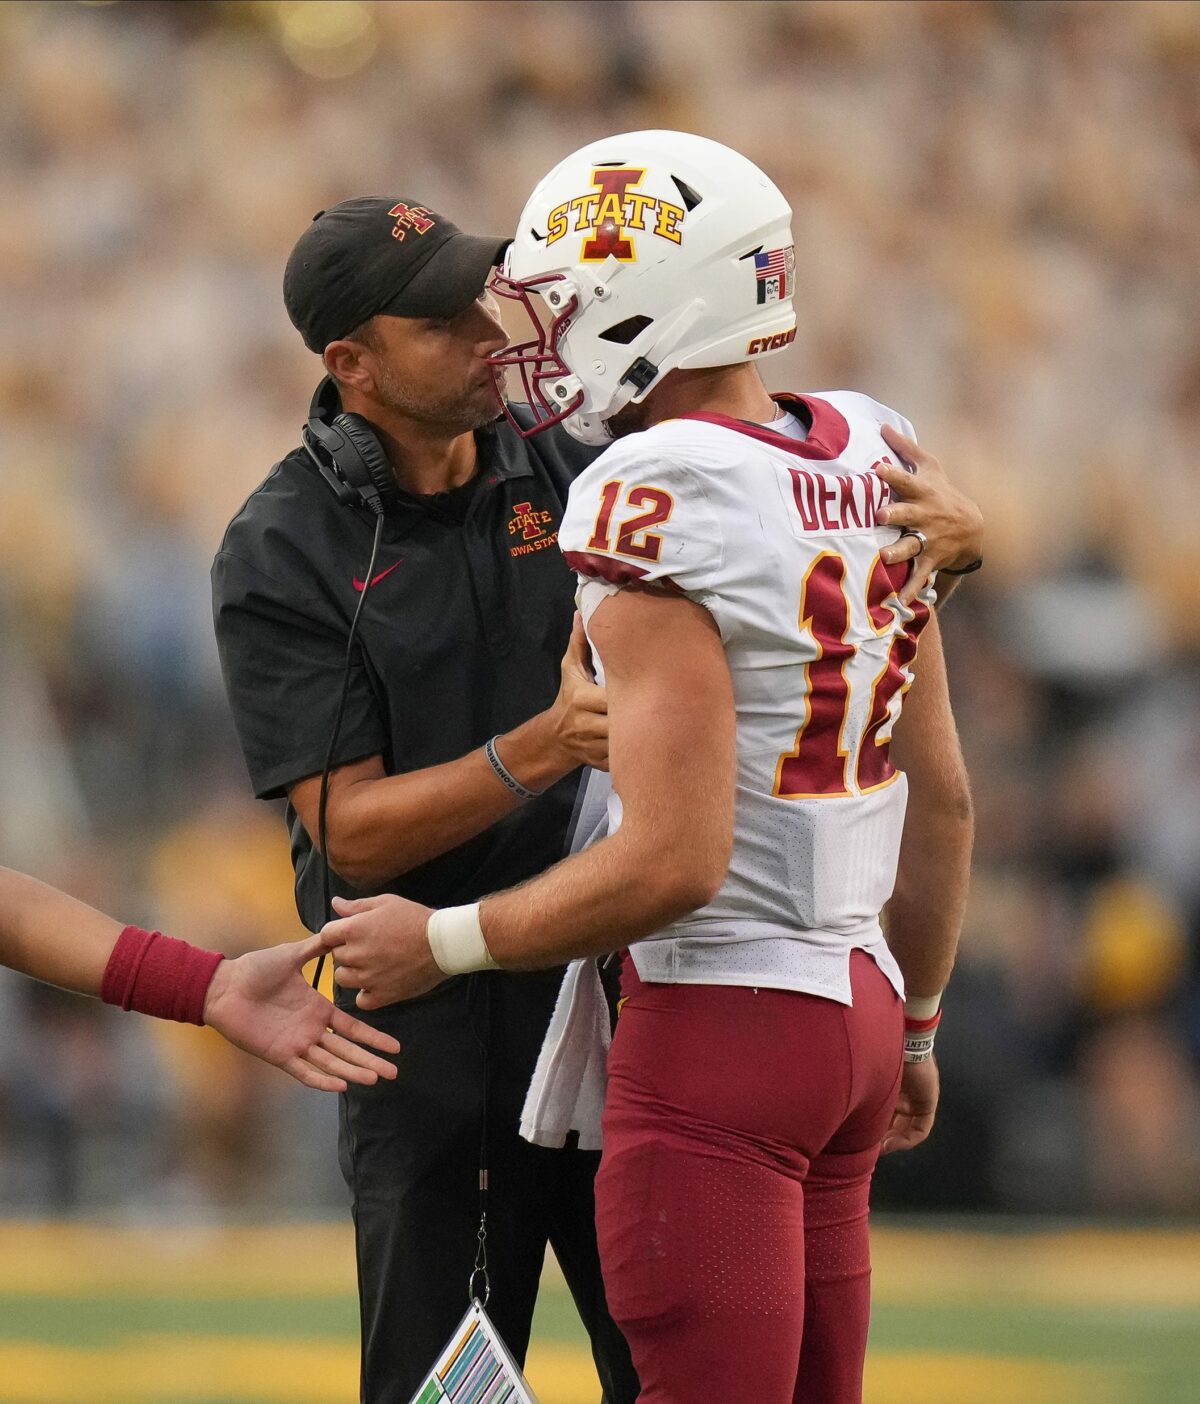 Iowa State betting scandal adds another likely win to Texas’ schedule